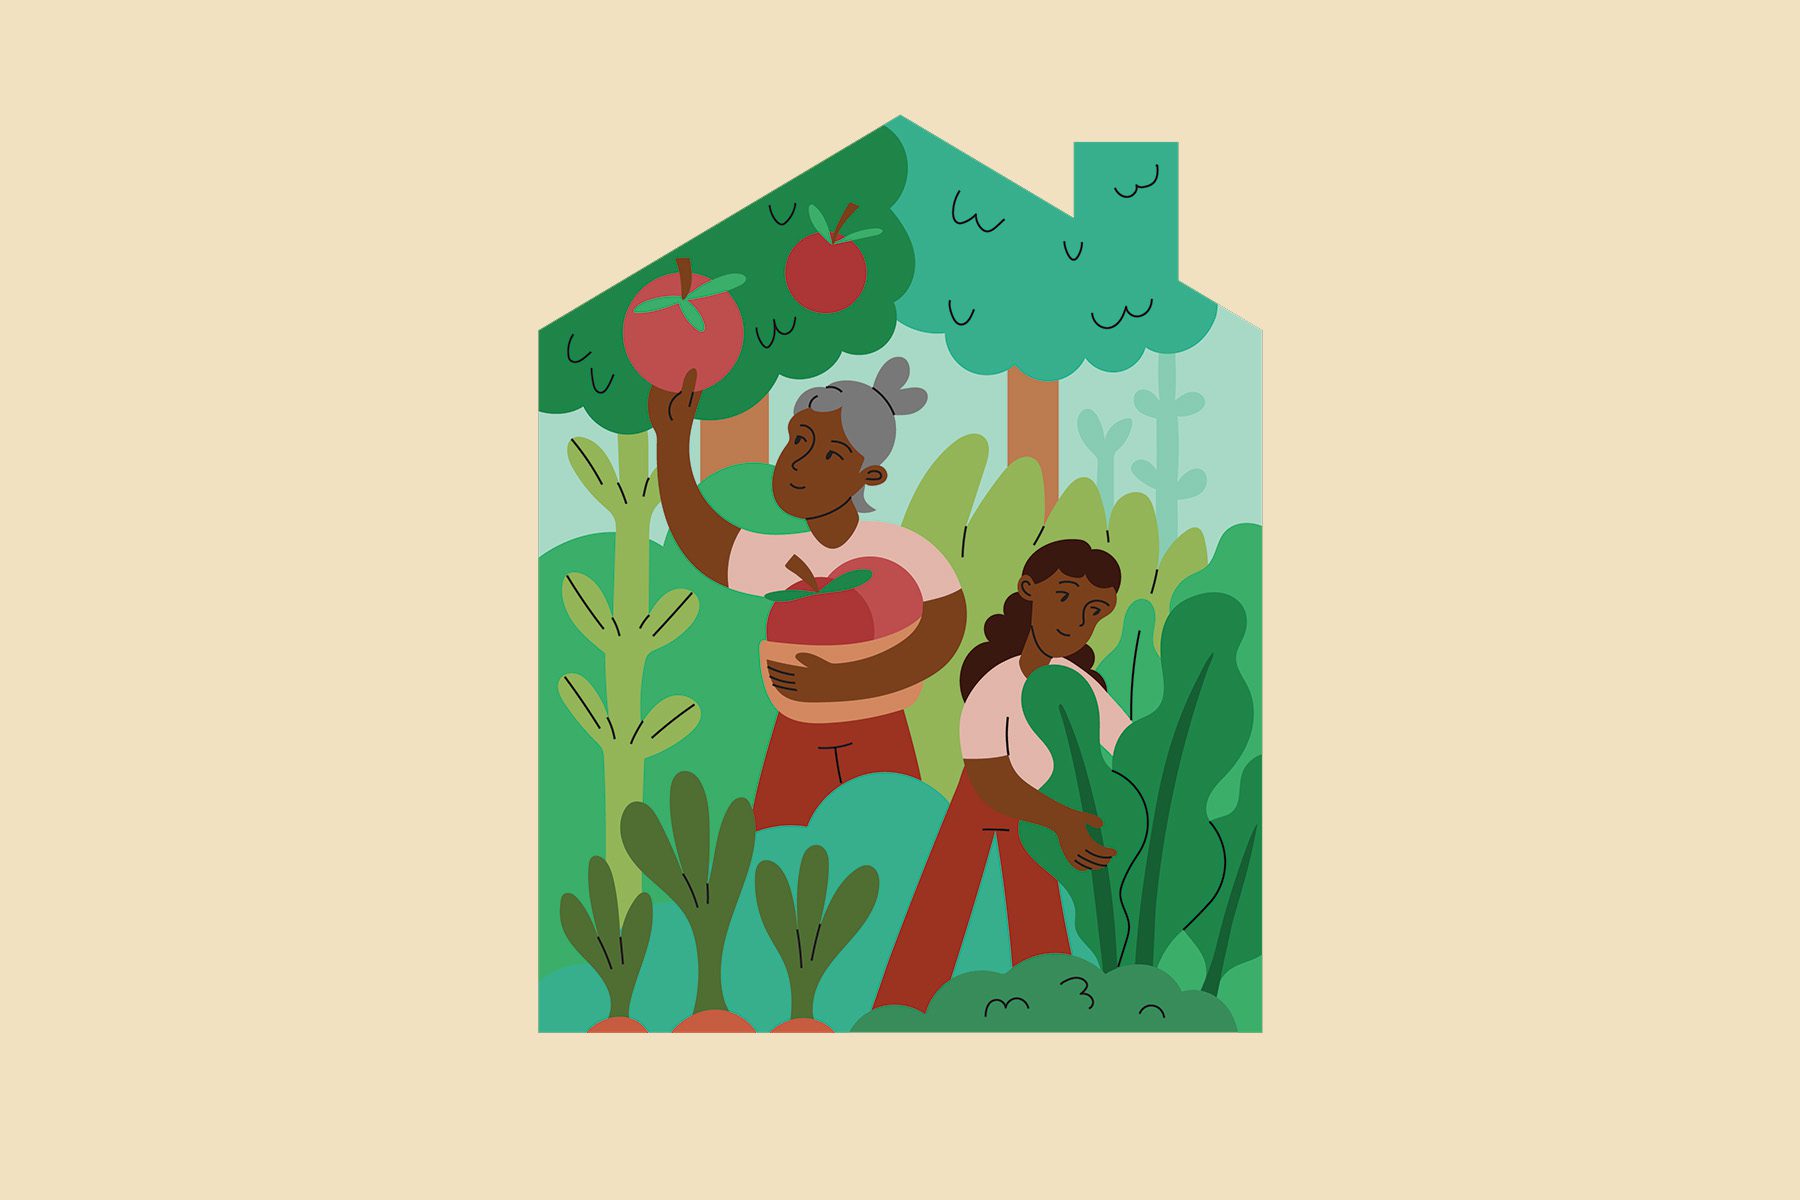 Illustration of an older and a younger woman farming fruits and vegetables together.